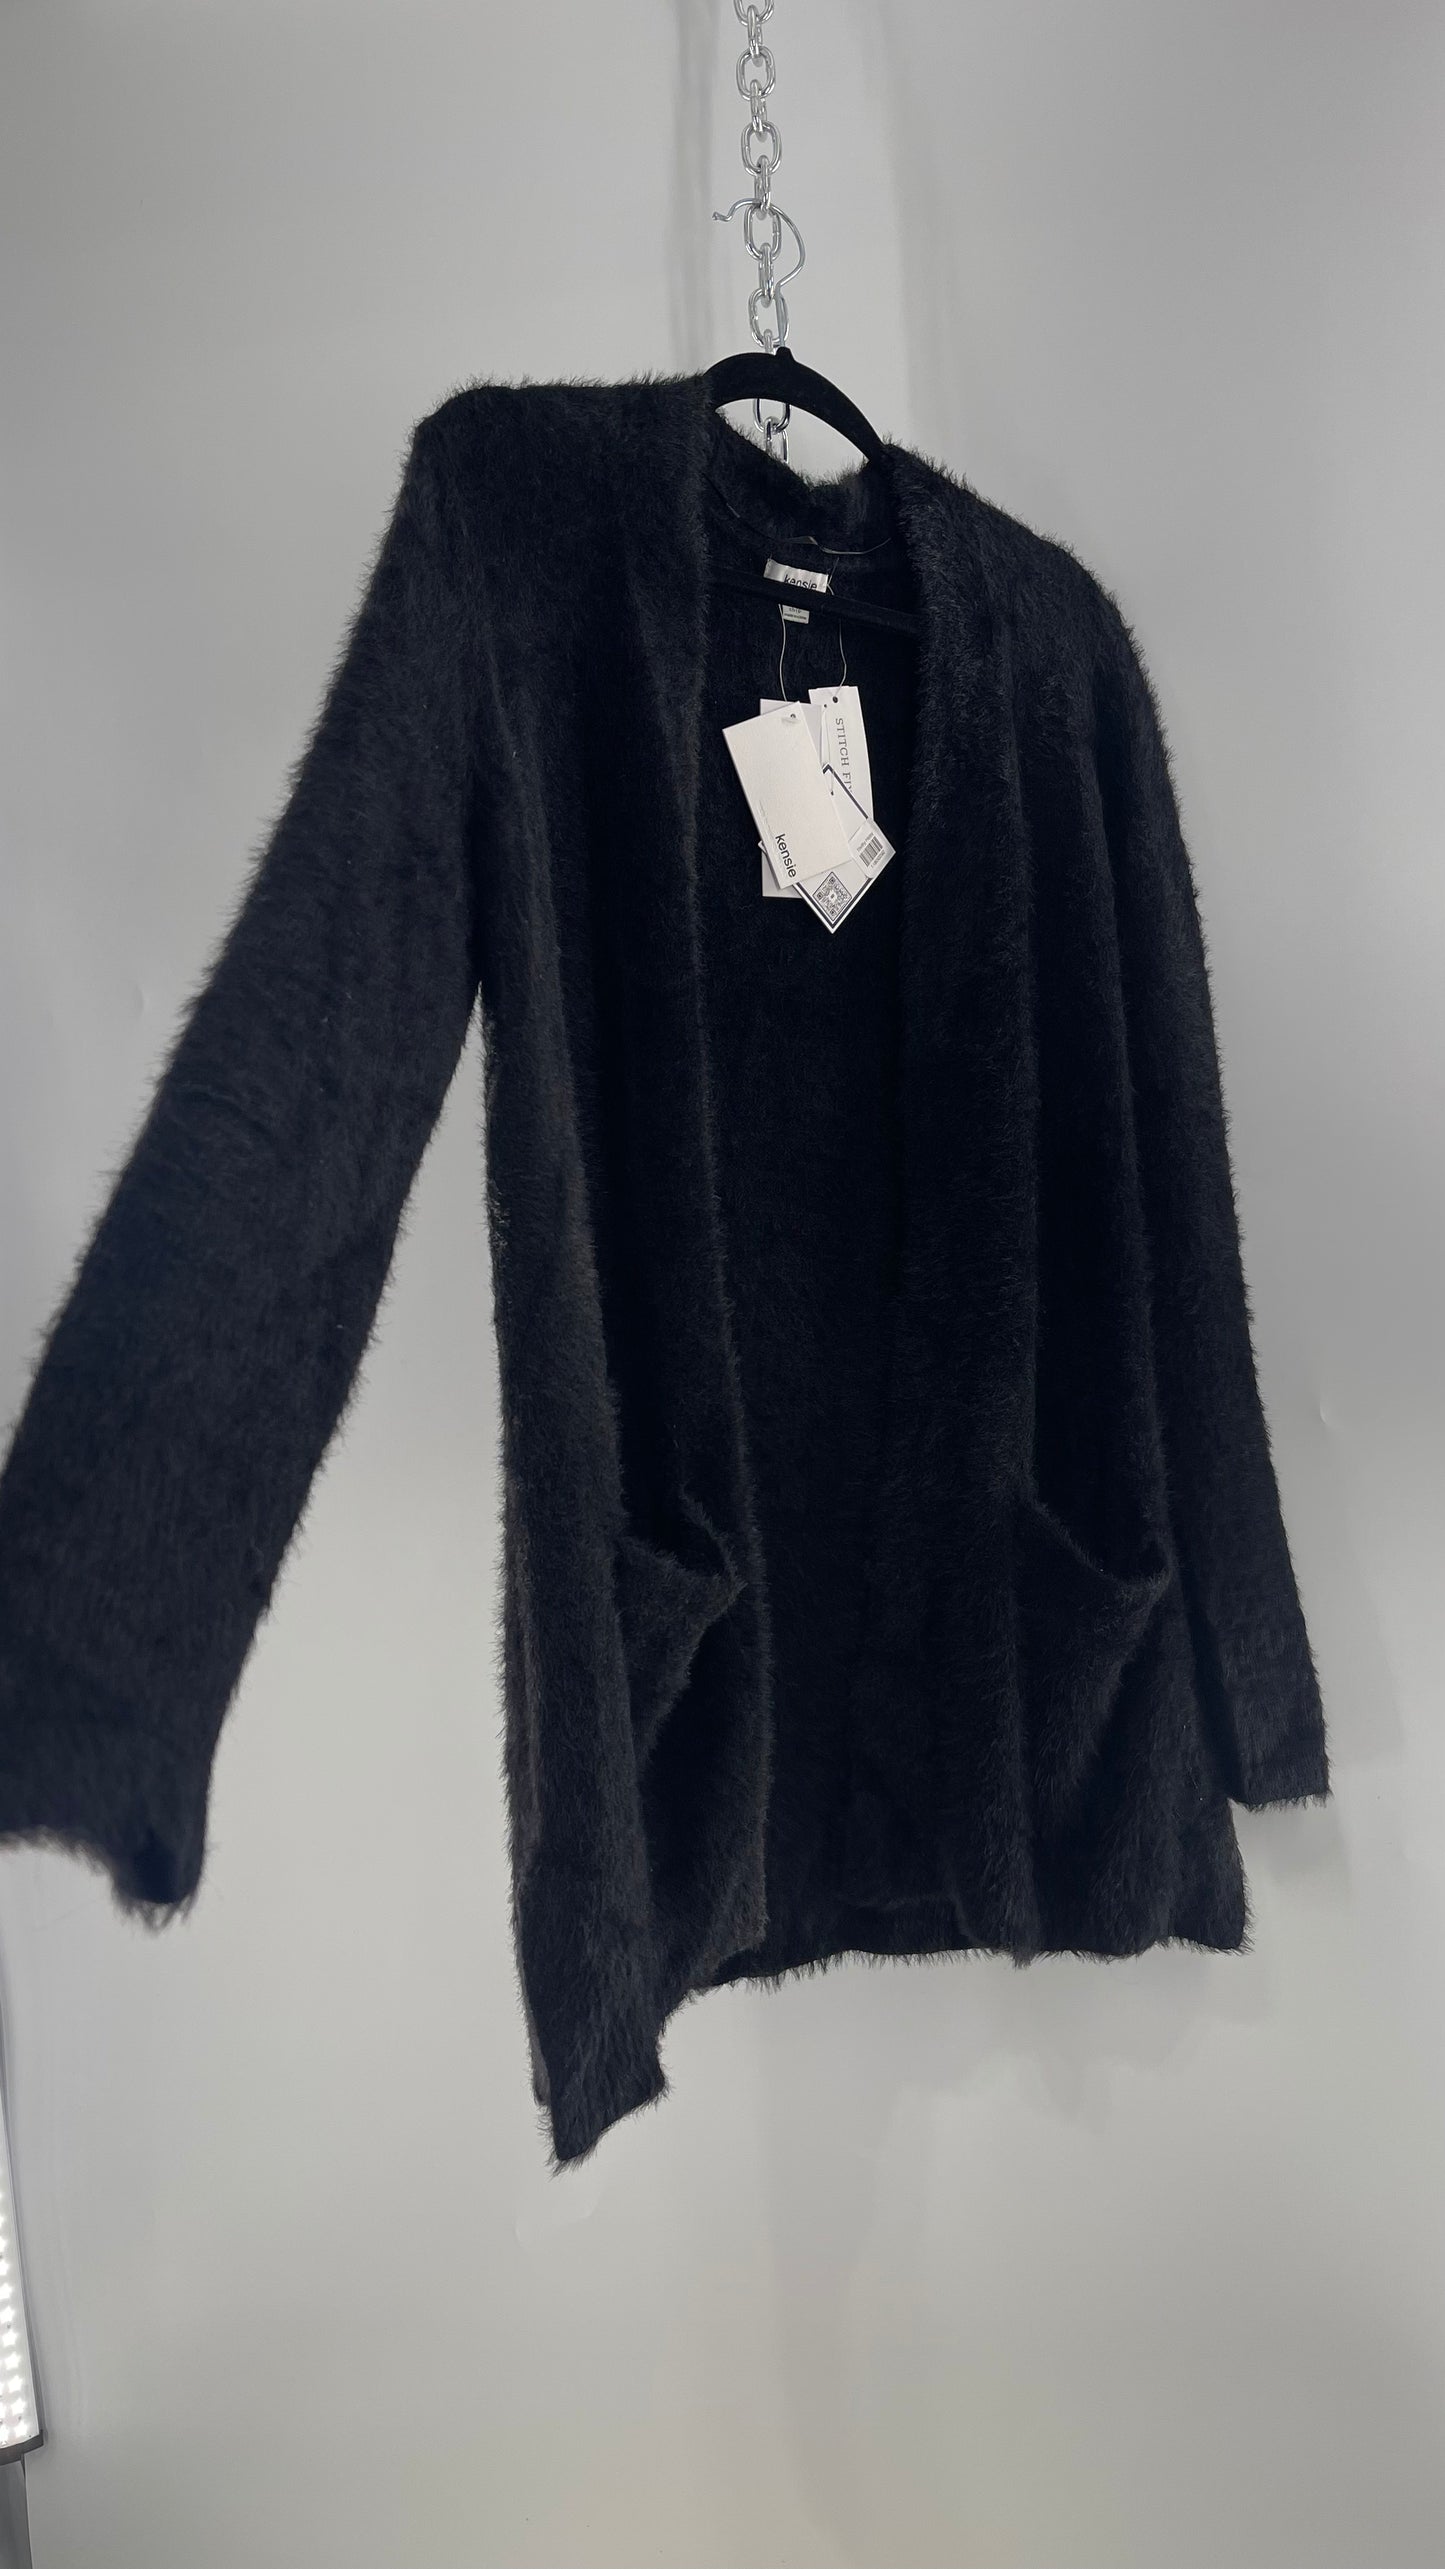 Kensie Black Fuzzy Slouchy Cardigan with Pockets and Tags Attached (Small)